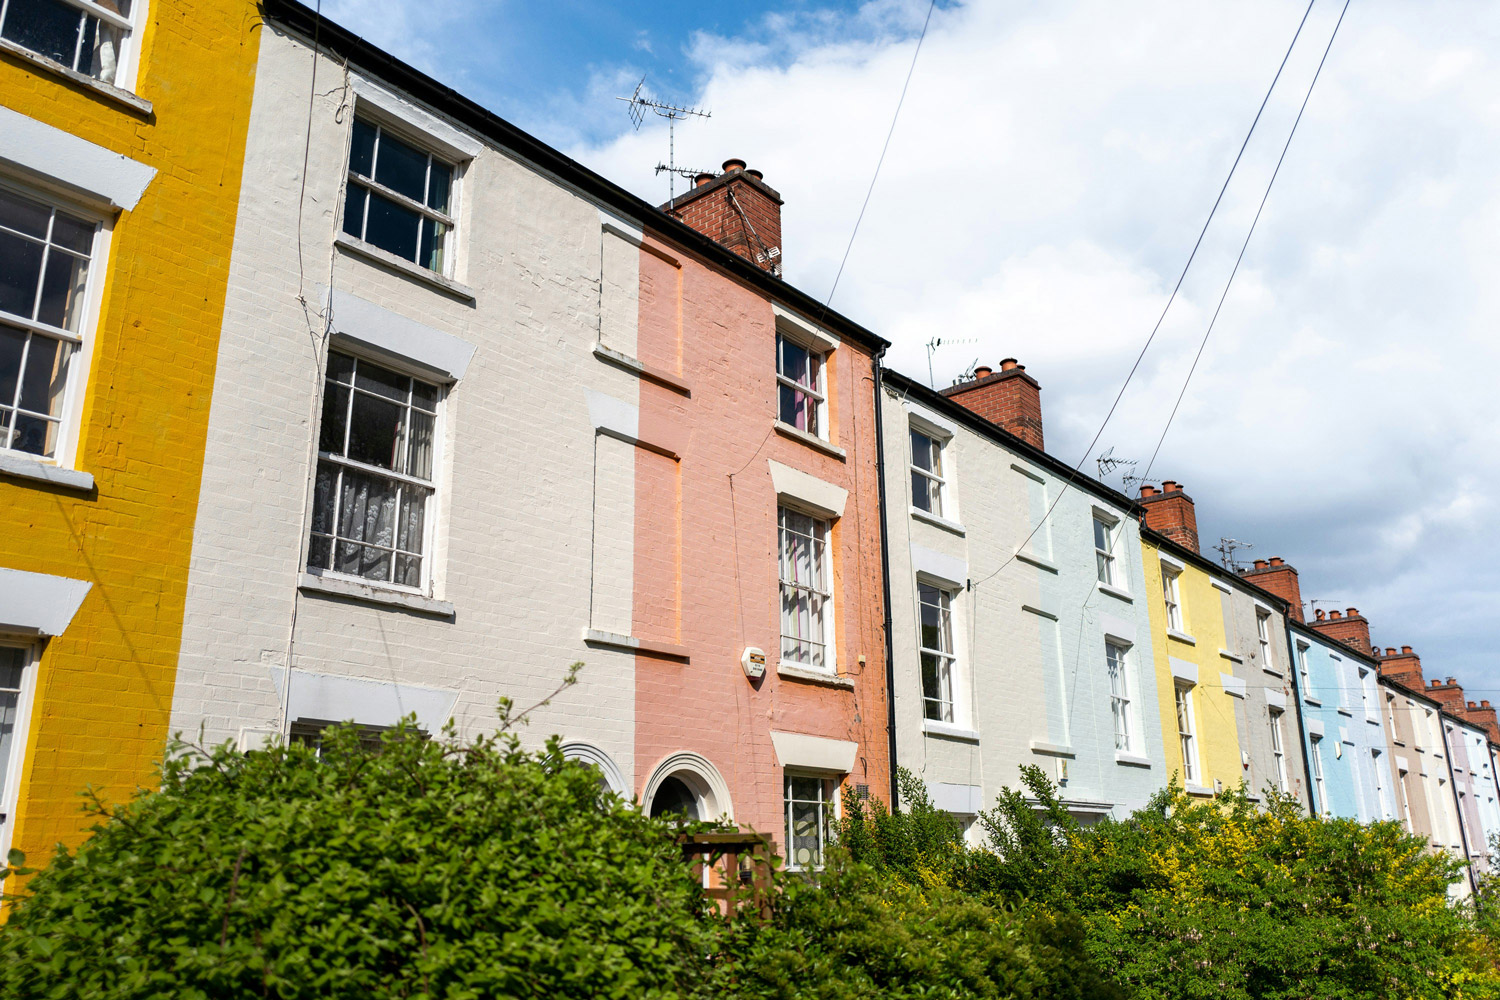 A row of colourful terraced houses under a blue sky with light clouds.